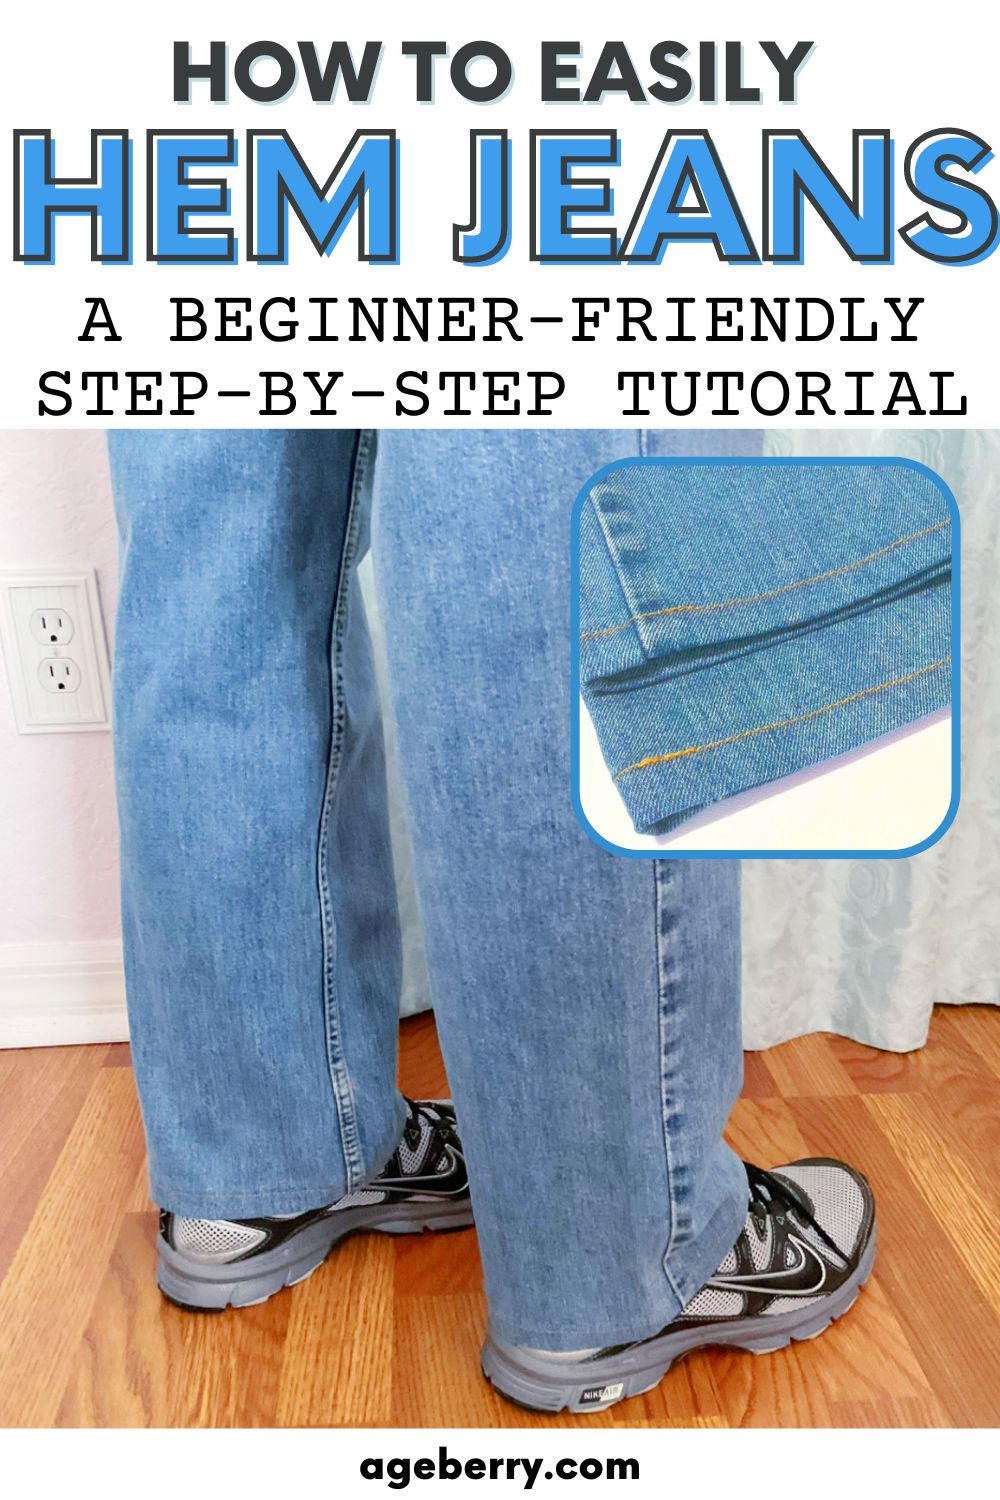 How to Easily Hem Jeans at Home_ A Beginner-Friendly Step-by-Step Tutorial